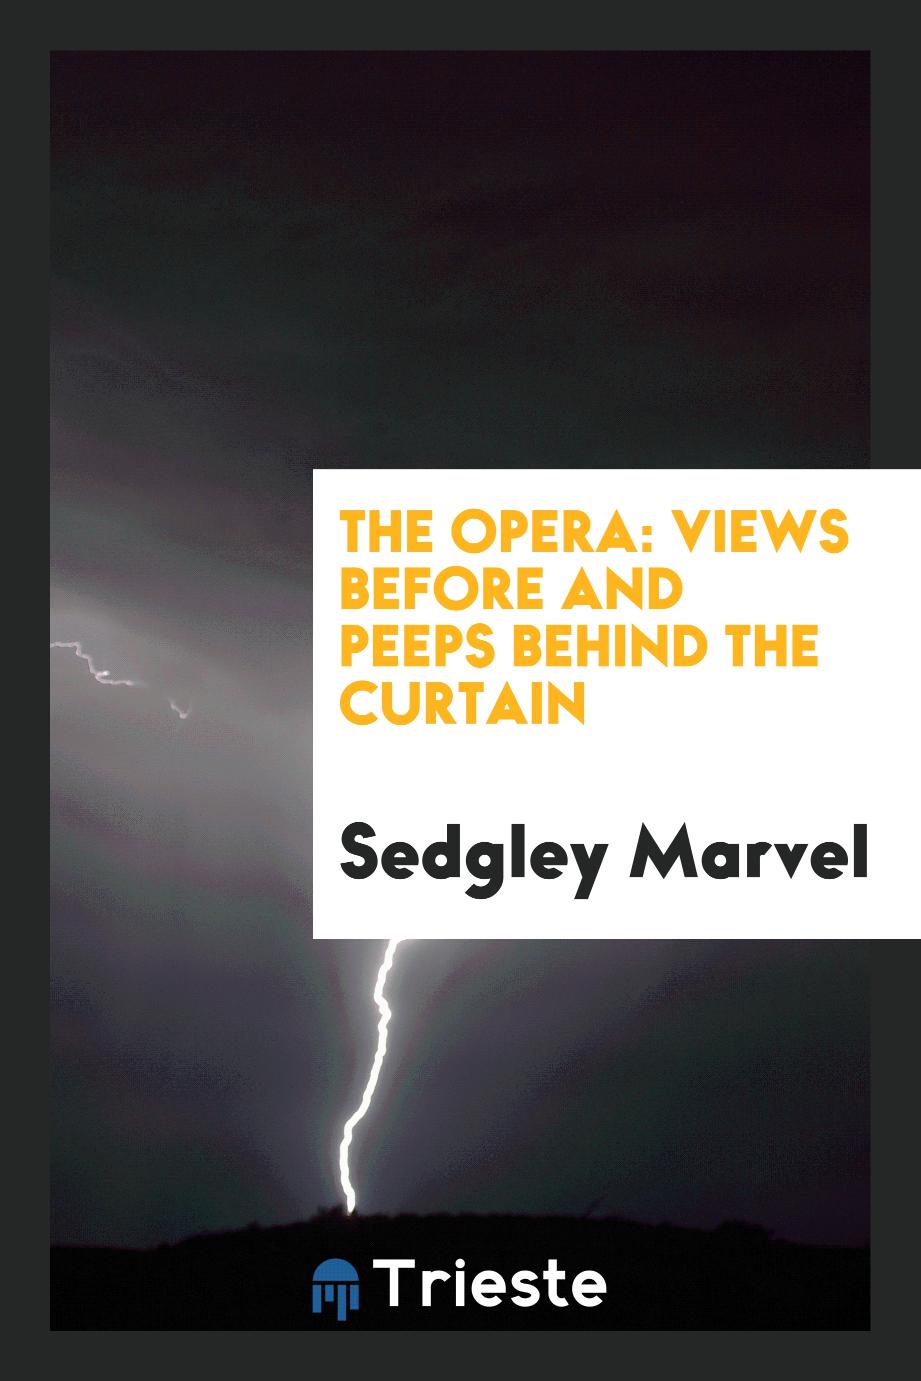 The opera: views before and peeps behind the curtain